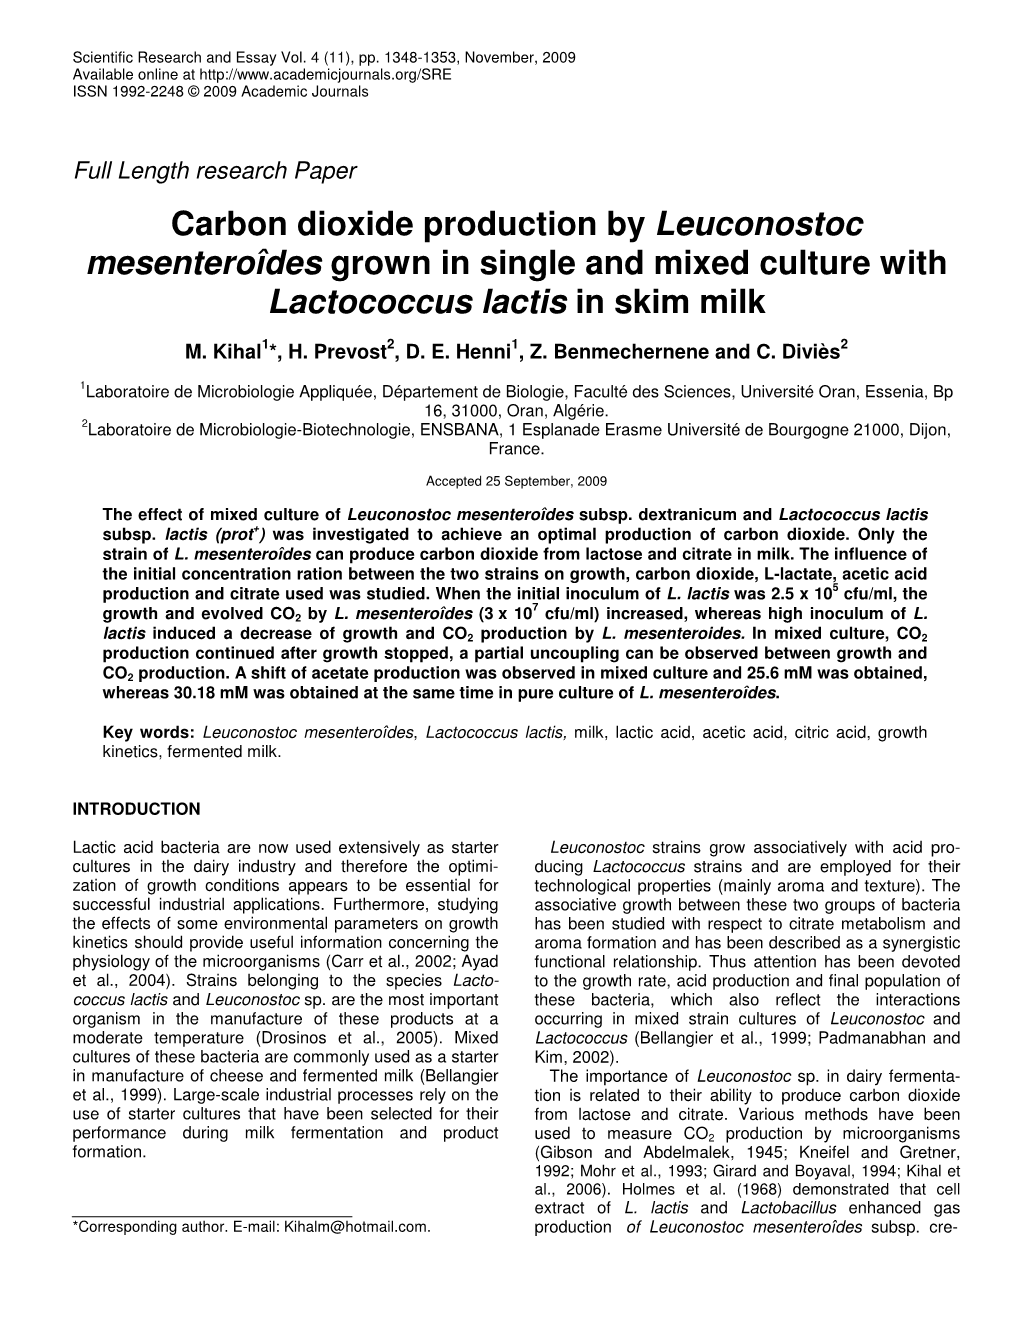 Carbon Dioxide Production by Leuconostoc Mesenteroîdes Grown in Single and Mixed Culture with Lactococcus Lactis in Skim Milk